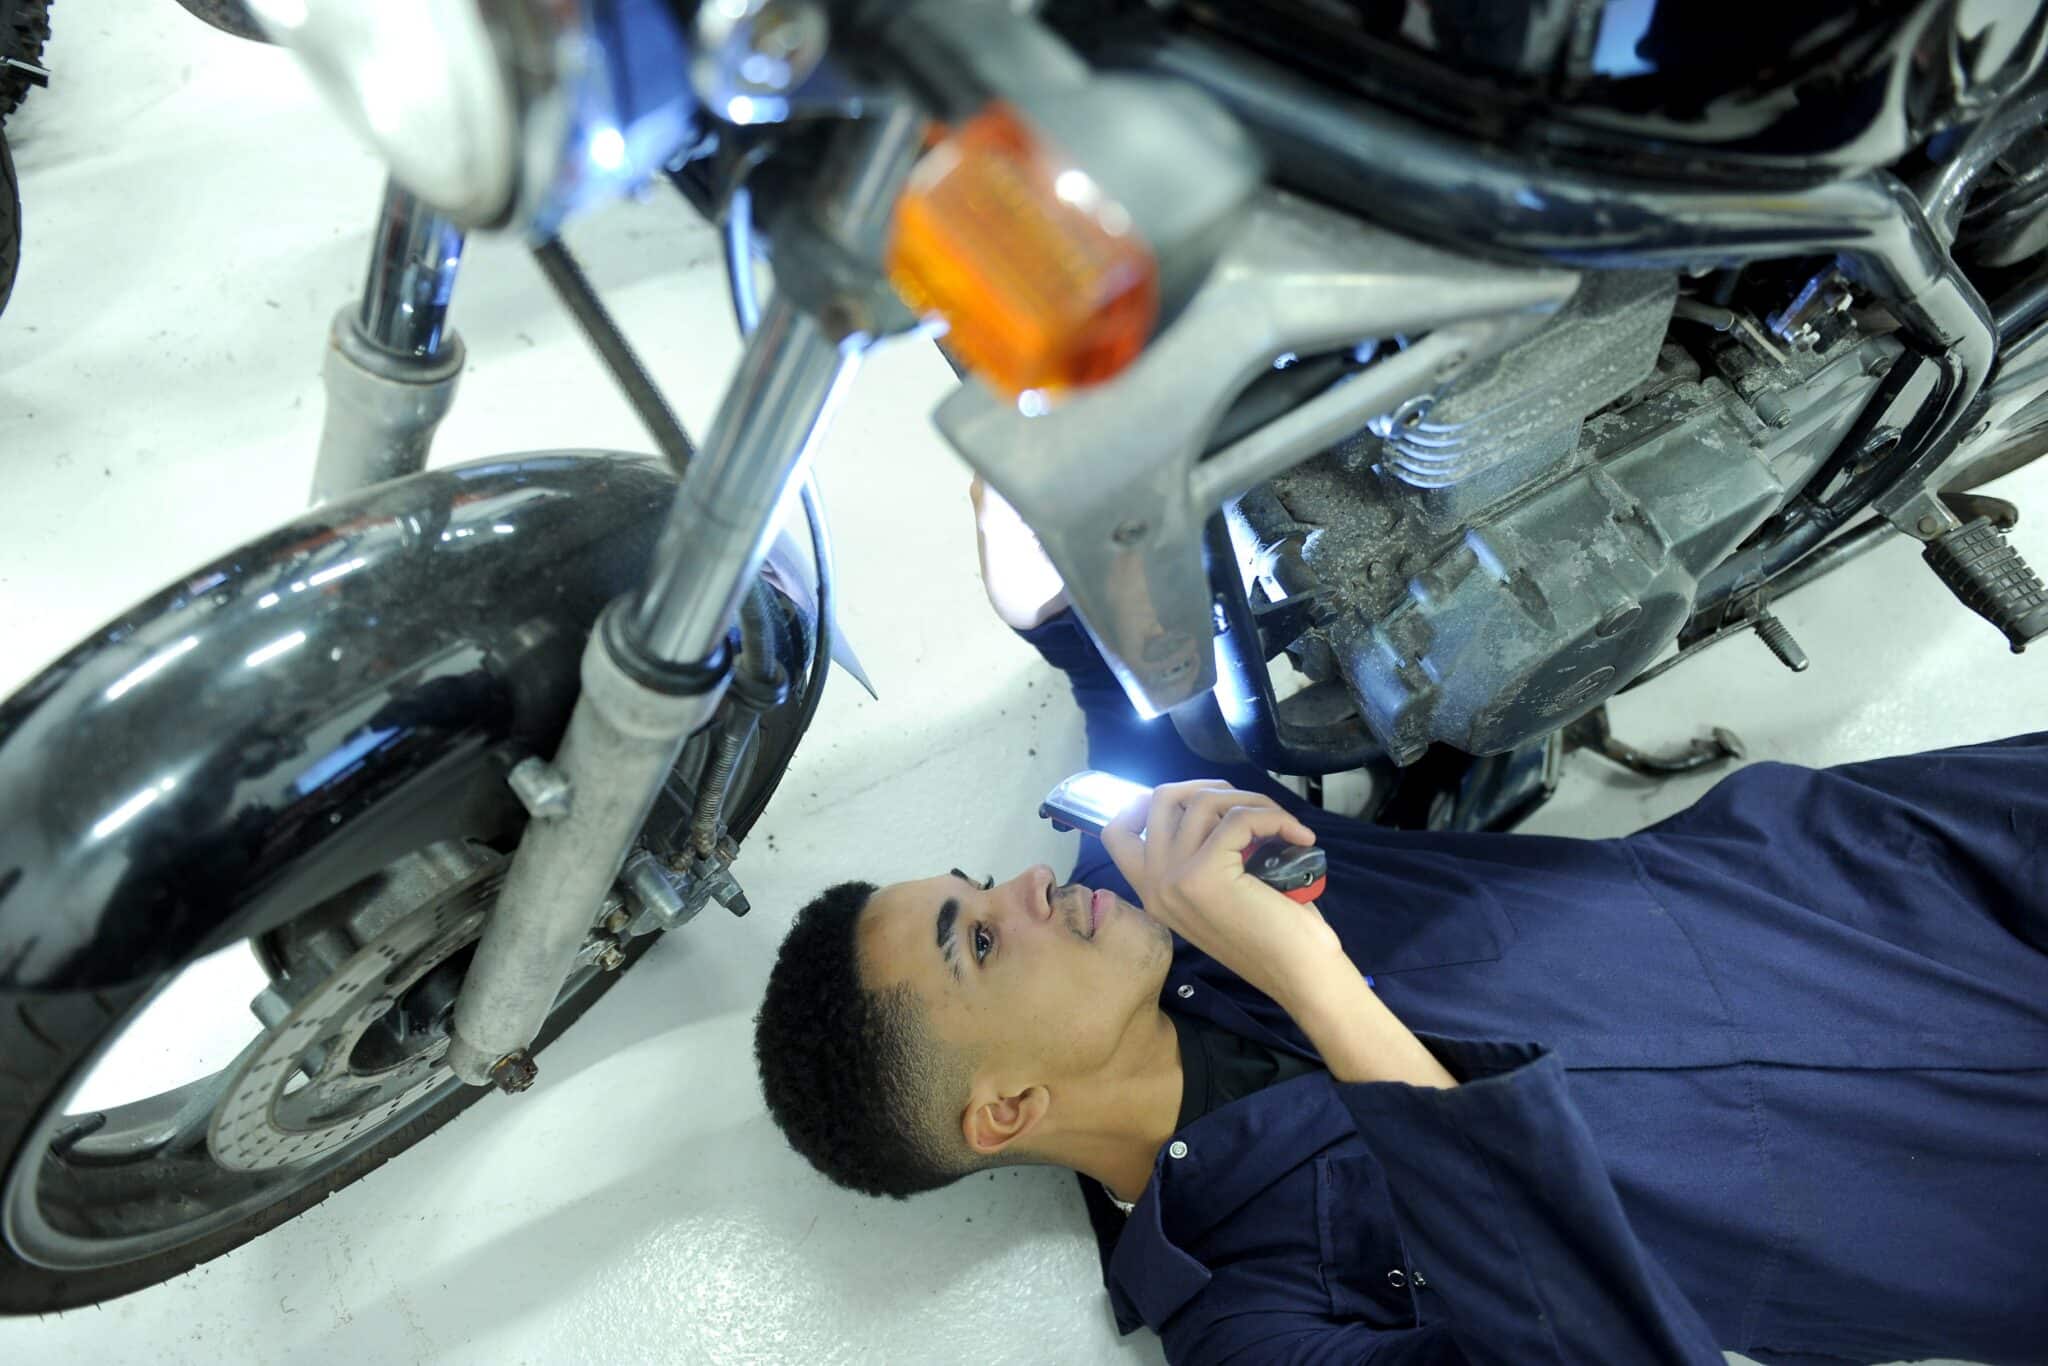 Motor Vehicle courses seal industry approval